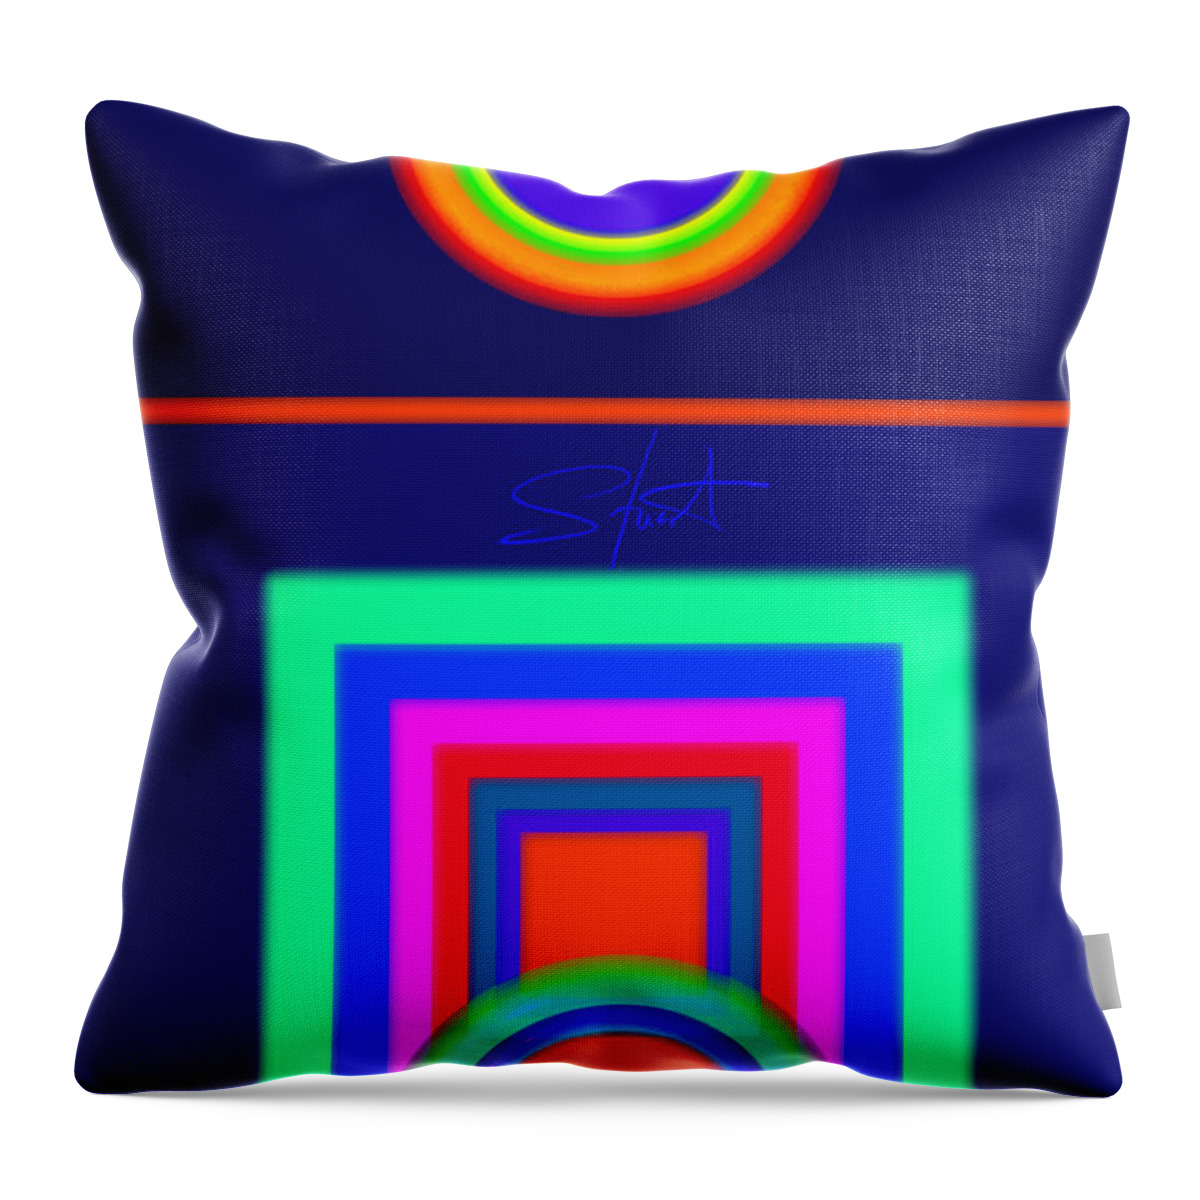 Classical Throw Pillow featuring the digital art Midnight Journey by Charles Stuart